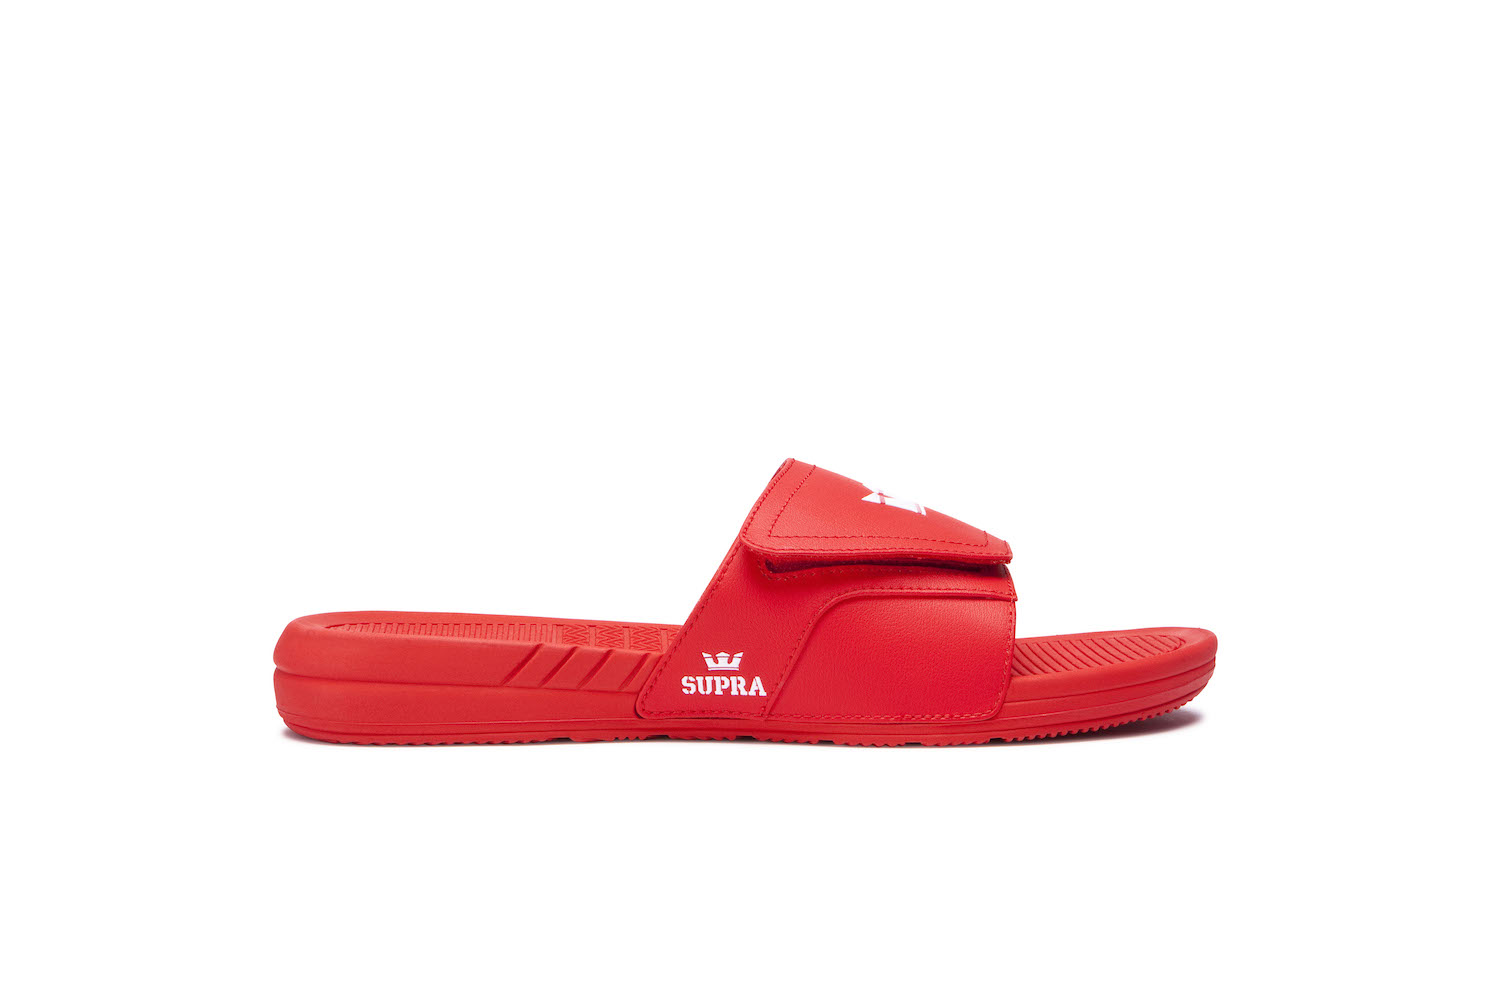 The Supra Locker - Another Slide Hits the Market for Summer - WearTesters